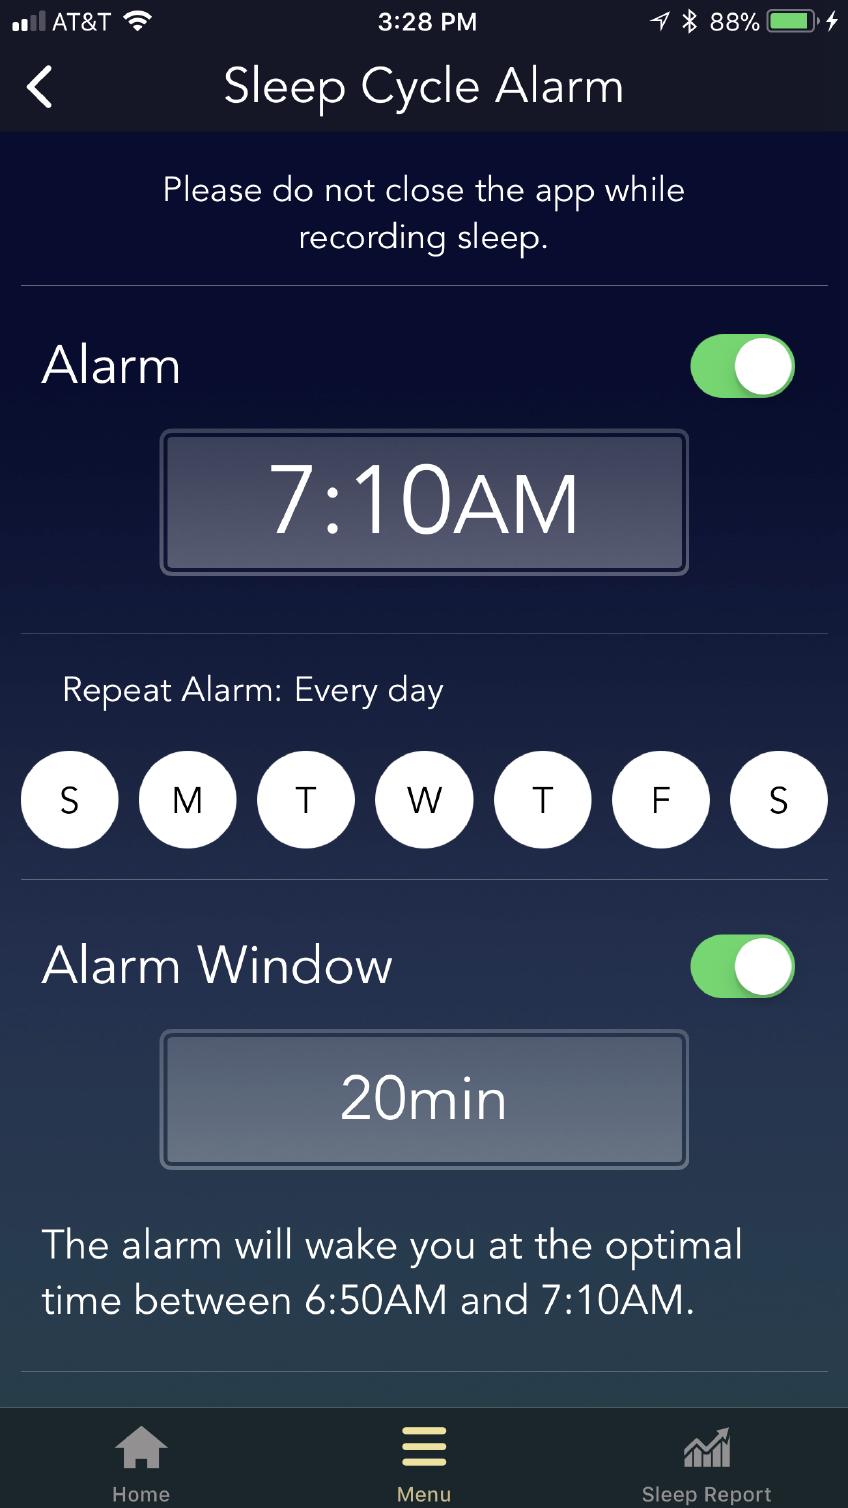 Access the alarm settings from Menu > Set Sleep Cycle Alarm. Set the latest time at which the alarm will sound.